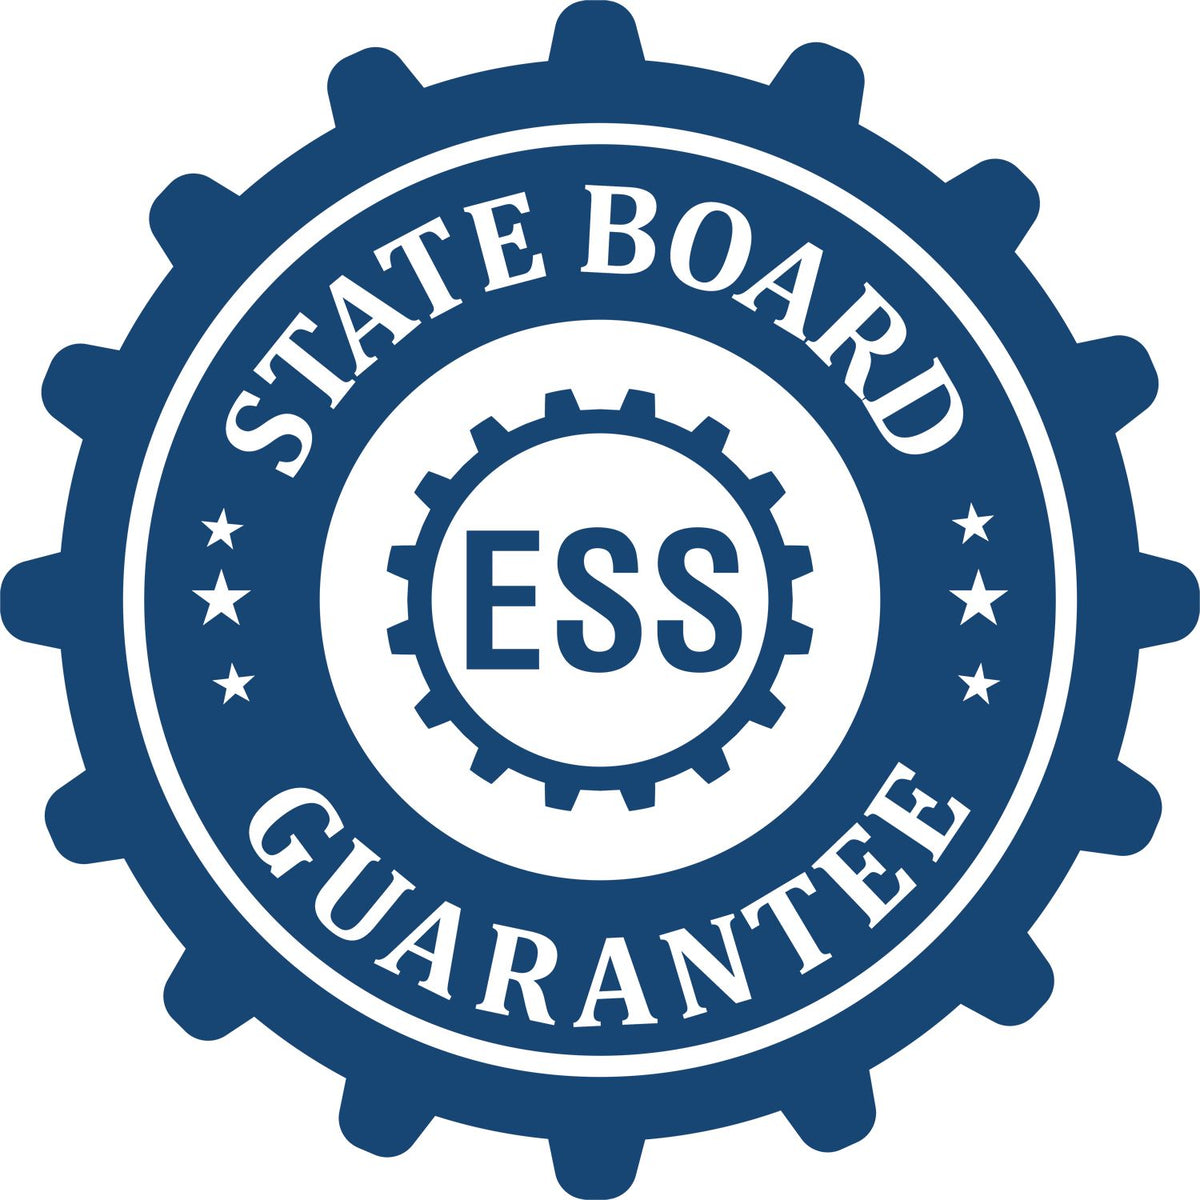 An emblem in a gear shape illustrating a state board guarantee for the Soft North Carolina Professional Engineer Seal product.